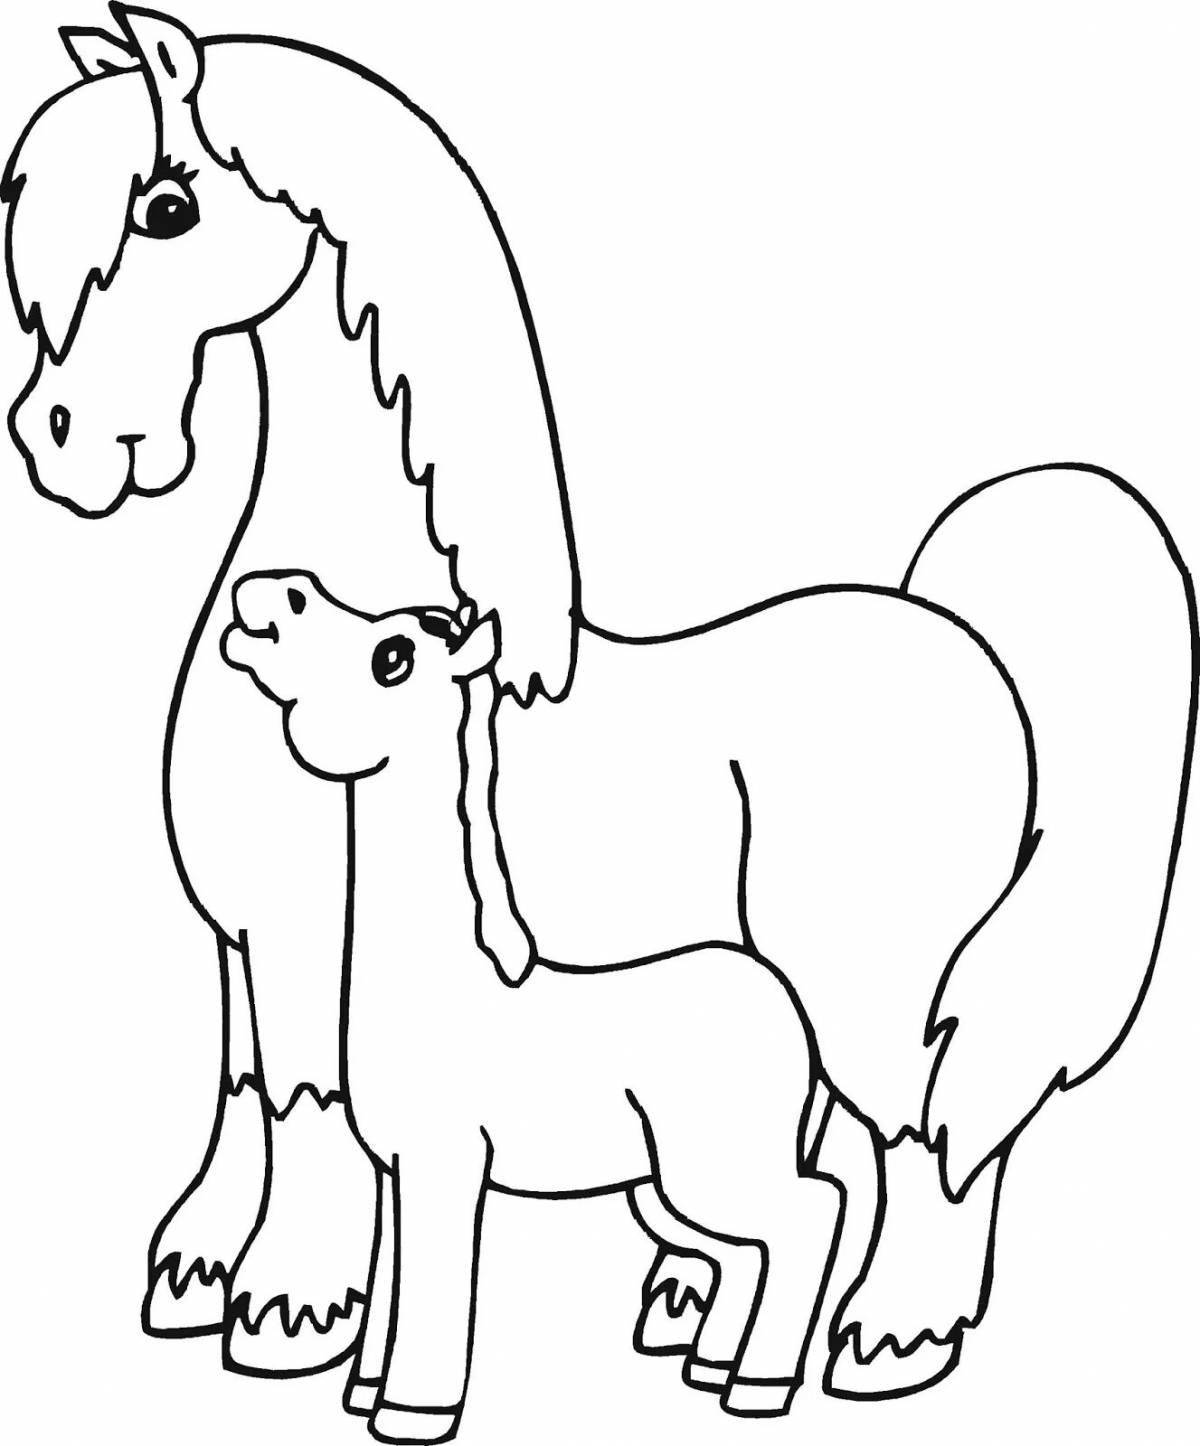 Colourful horse coloring book for children 4-5 years old